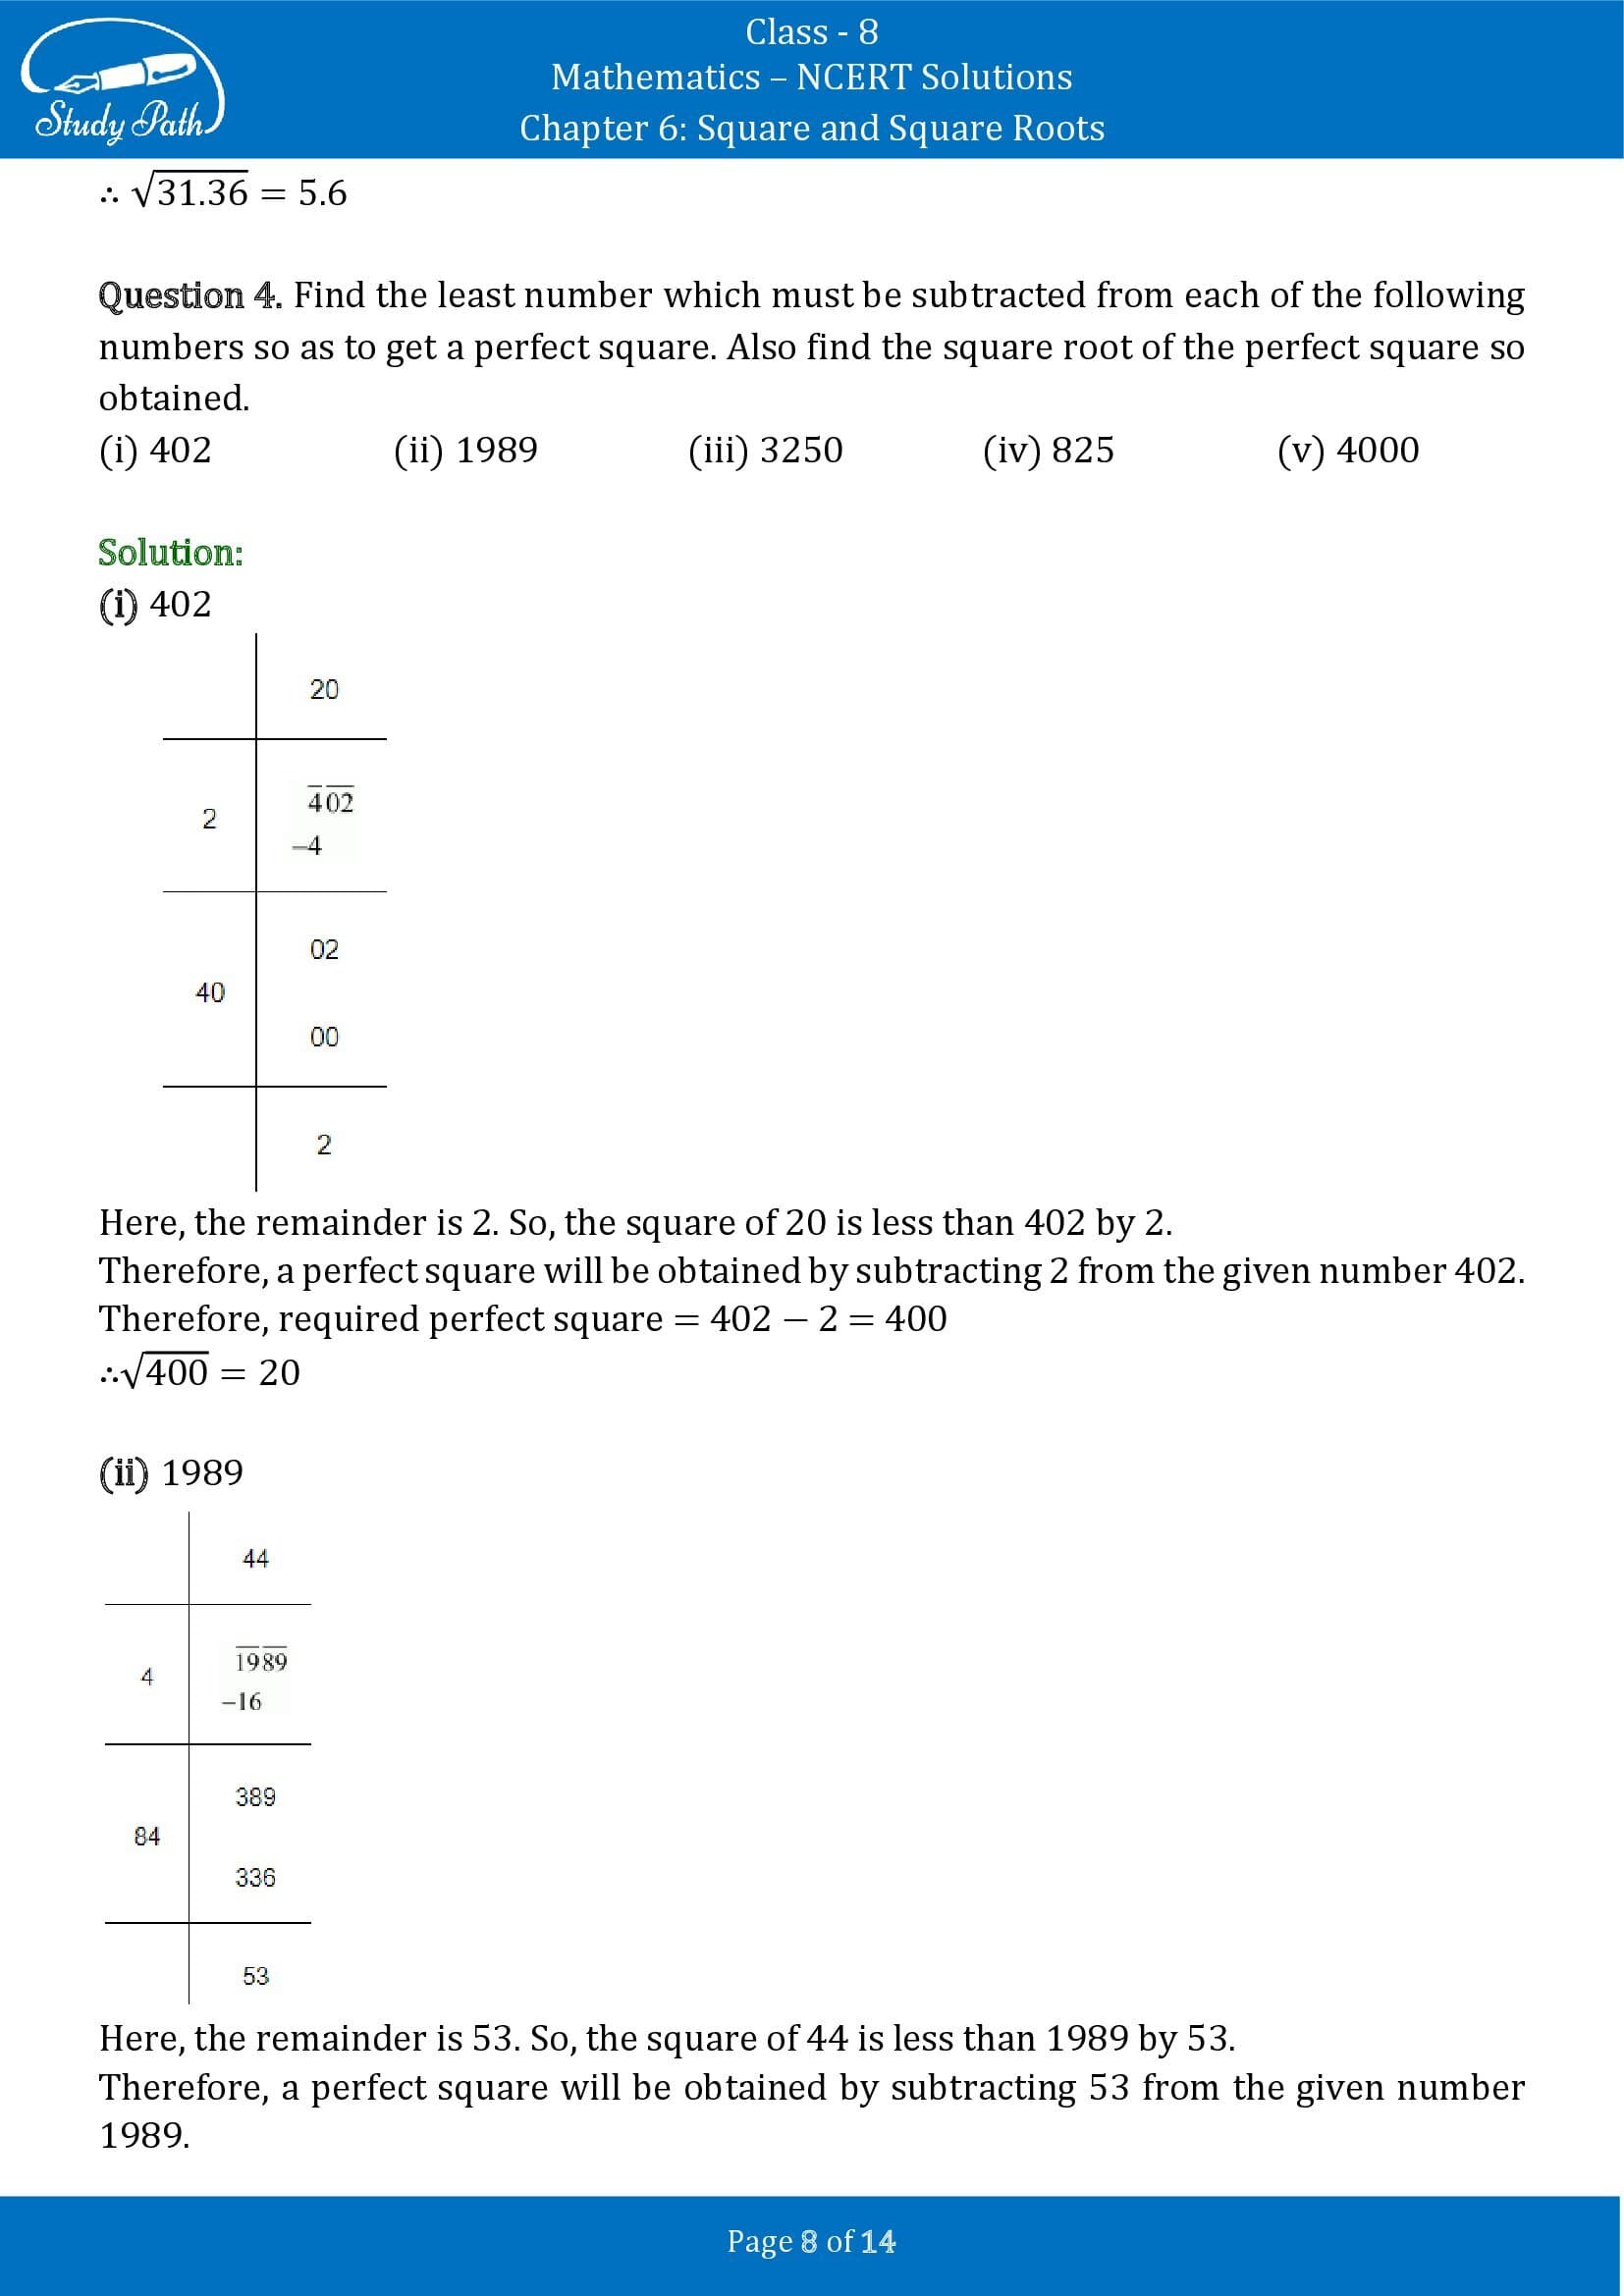 NCERT Solutions for Class 8 Maths Chapter 6 Square and Square Roots Exercise 6.4 00008